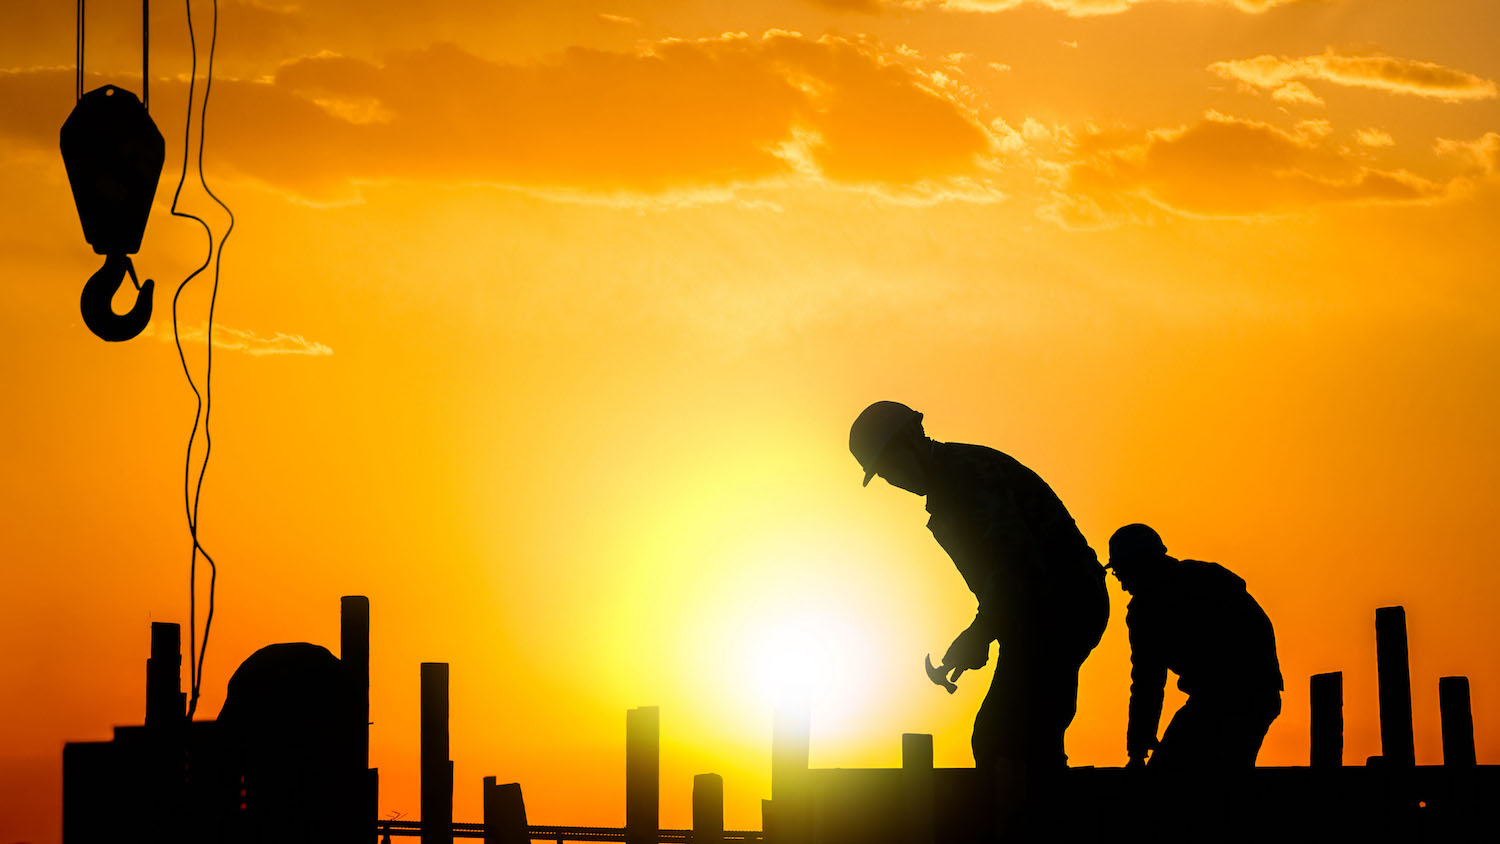 construction workers at sunset: dreamstime